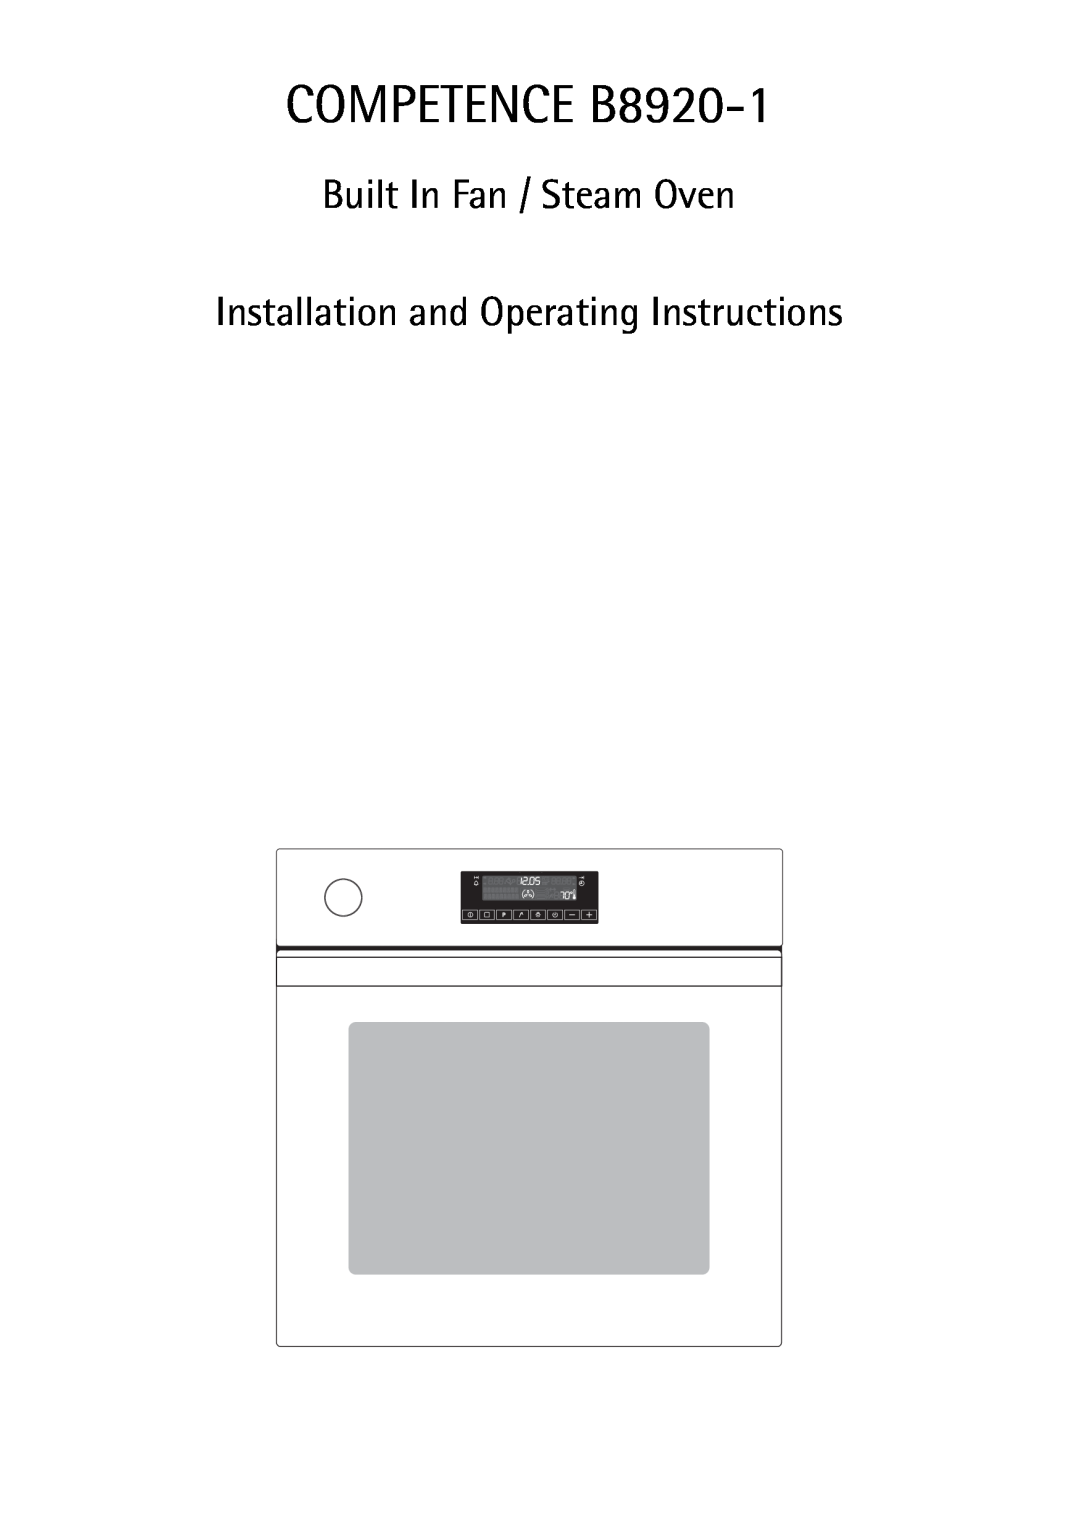 AEG manual COMPETENCE B8920-1, Built In Fan / Steam Oven, Installation and Operating Instructions 